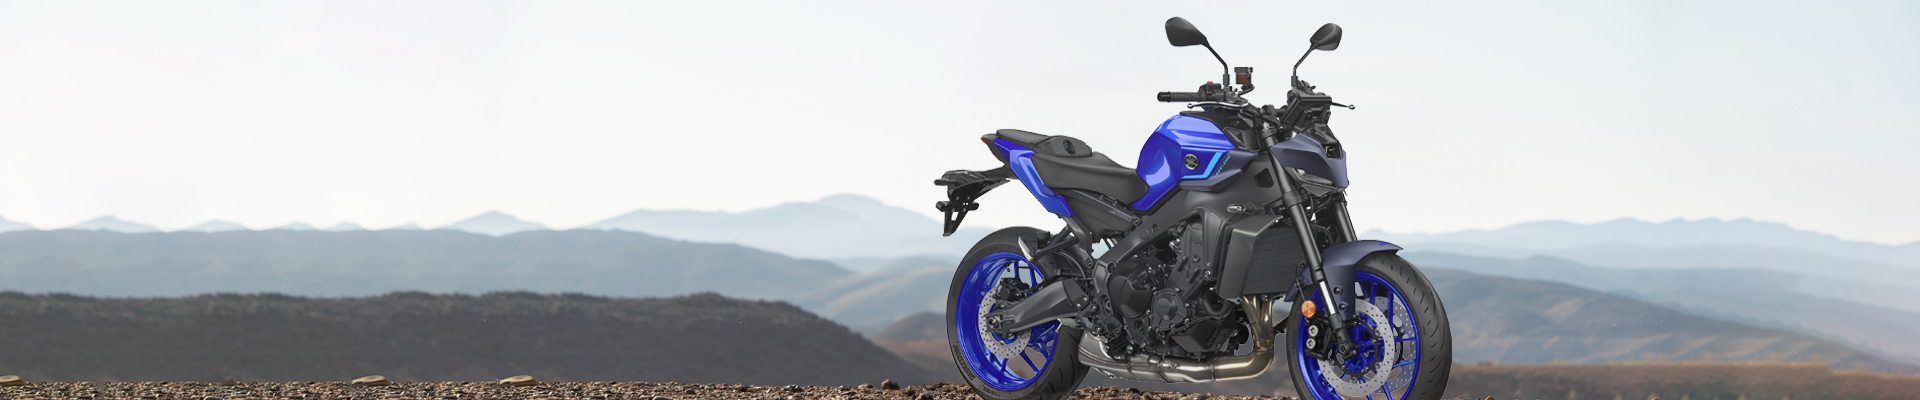 Yamaha MT 09 Motorbike with mountains in background